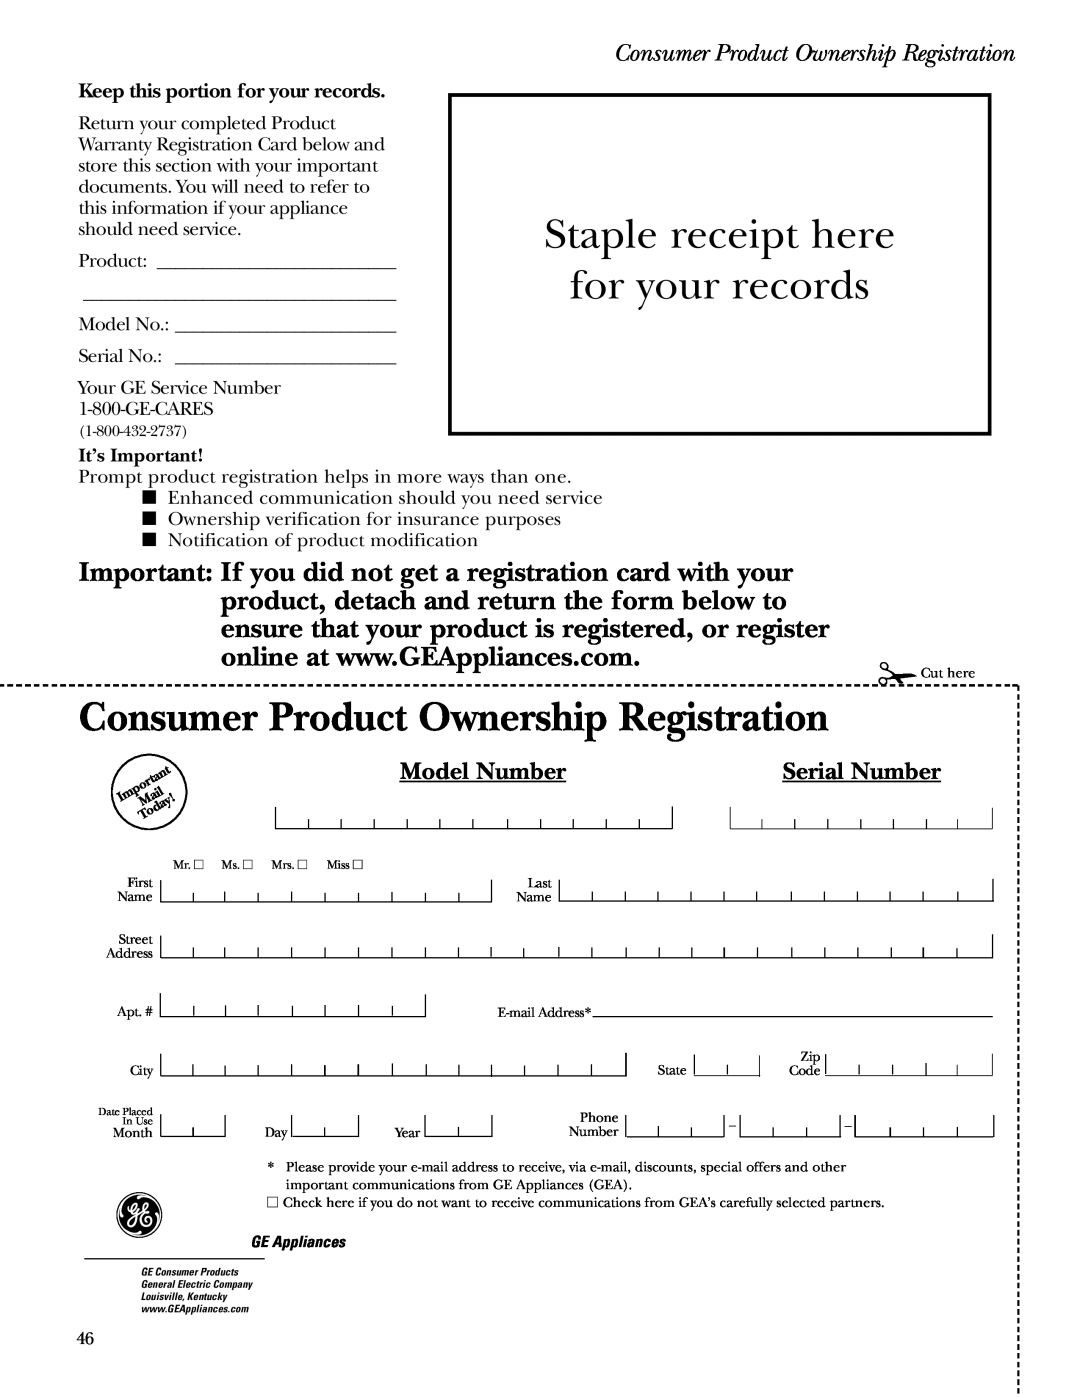 GE SCA1000WH Consumer Product Ownership Registration, Model Number, Serial Number, Keep this portion for your records 